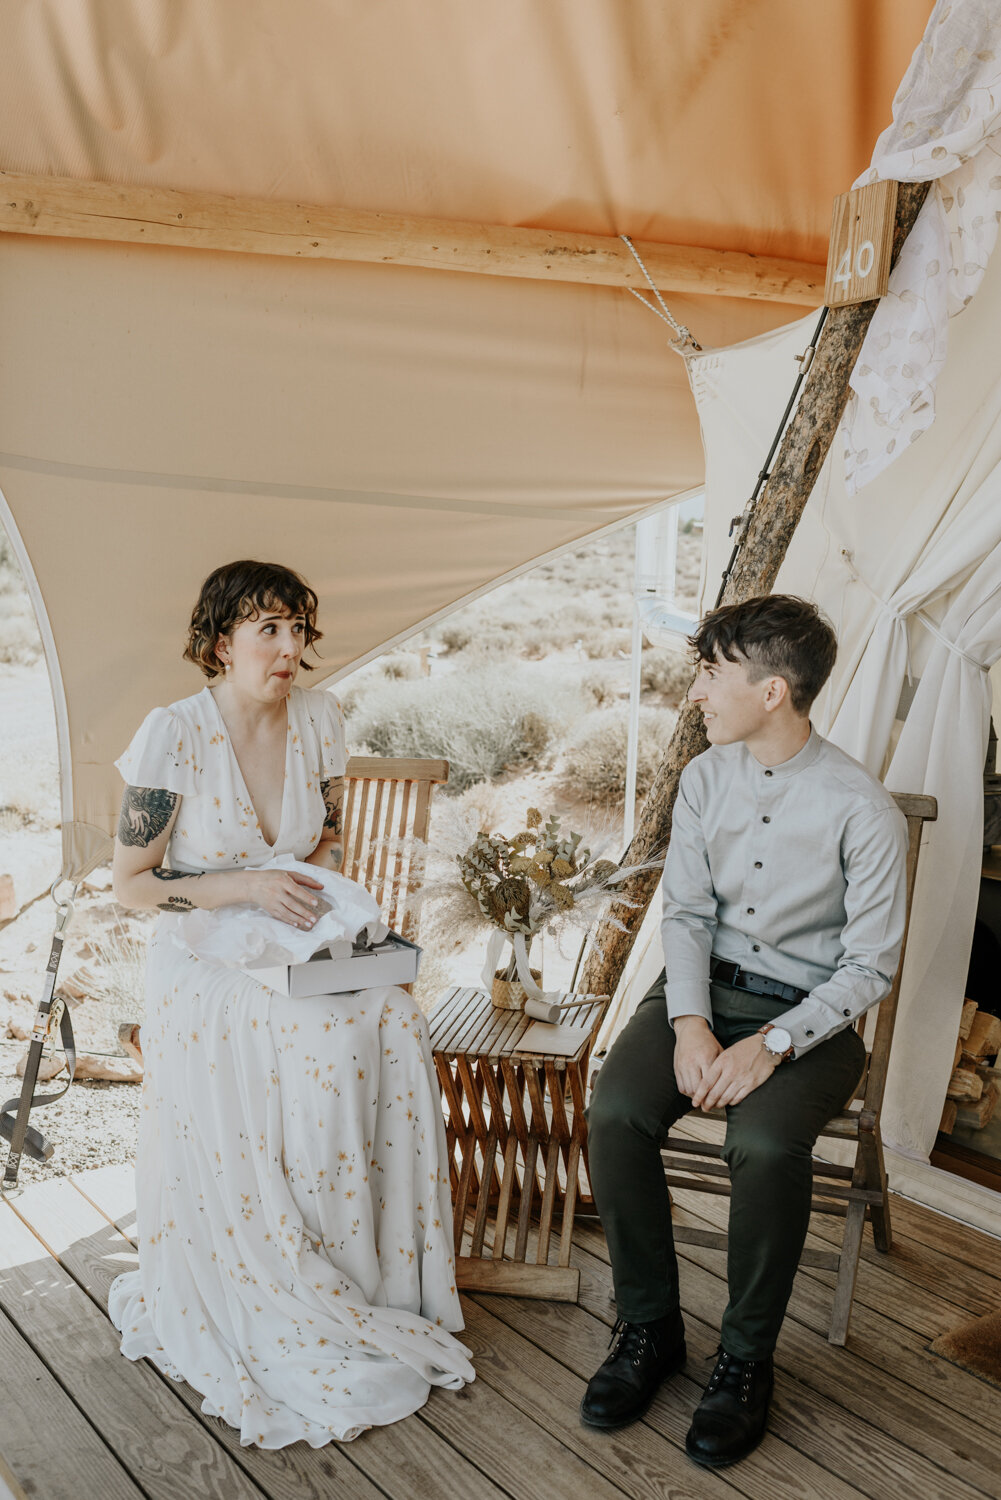 Under the Canvas in Moab, UT Sweet Elopement Celebration